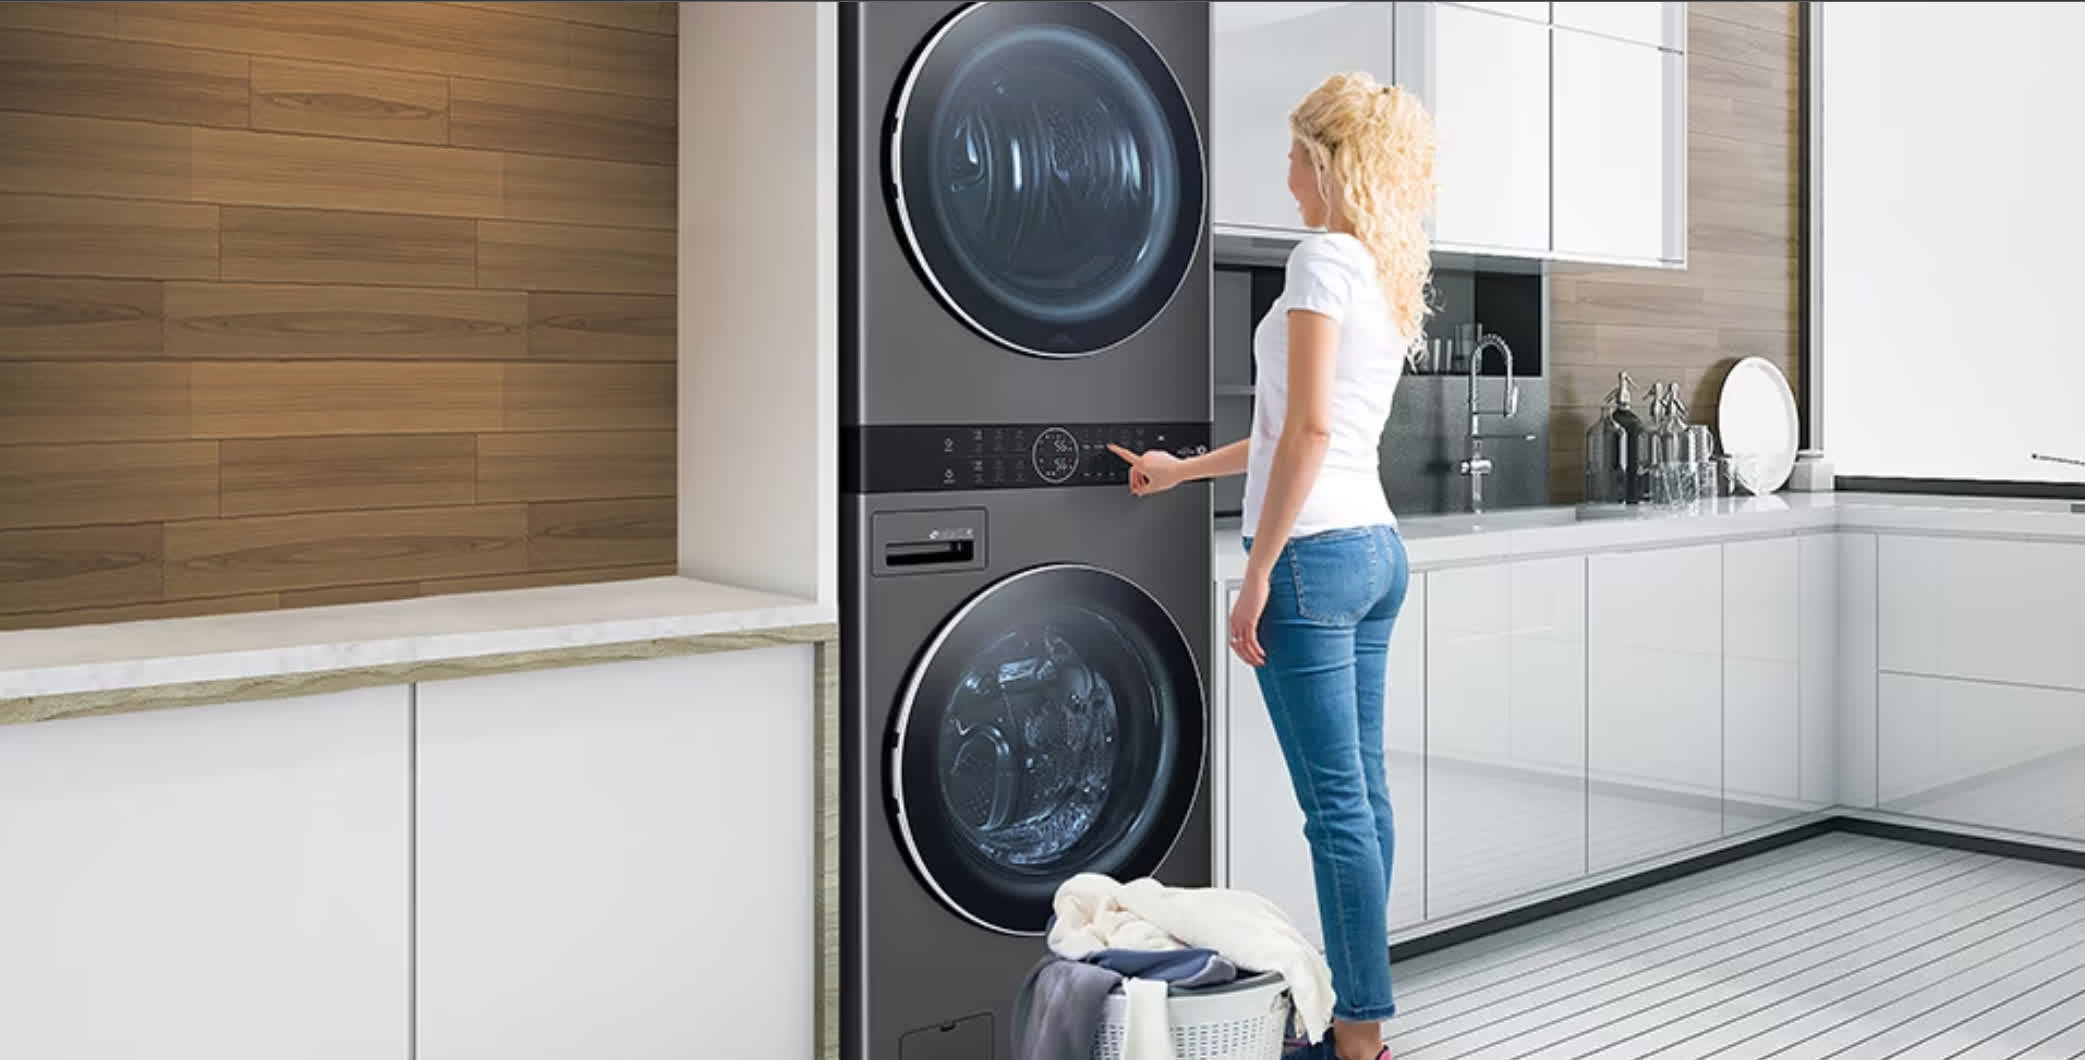 Mystery of LG washing machine using 3.6GB of data daily could have a simple explanation